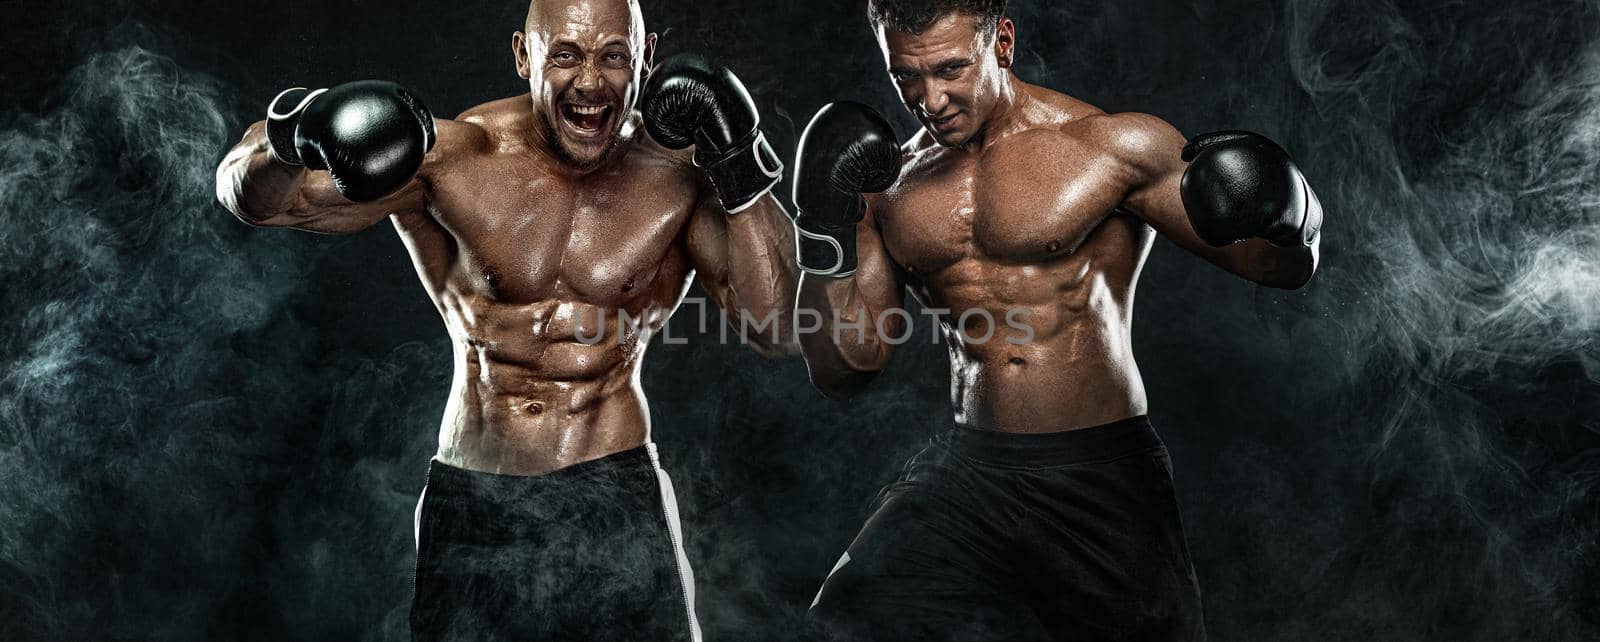 Street fighter fighting in boxing gloves. Isolated on black background with copy Space. Action shot. Sport concept.